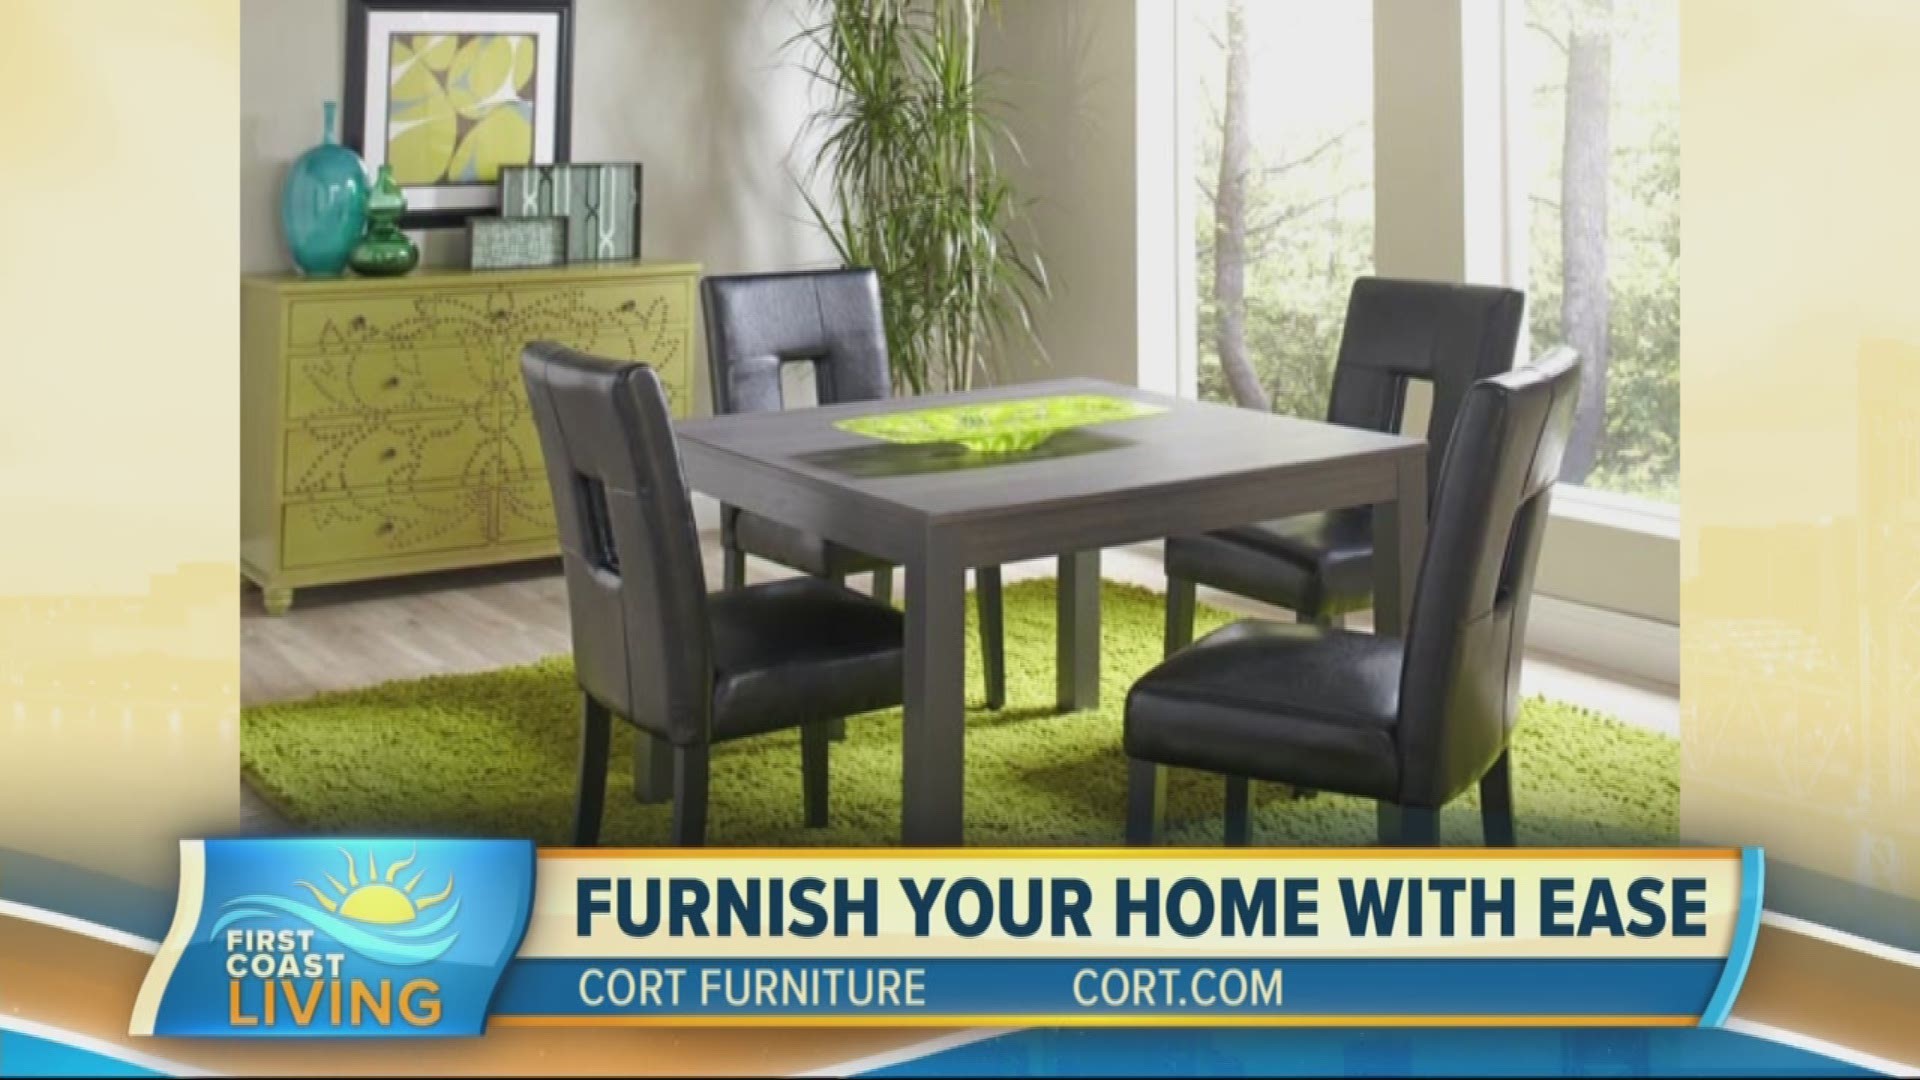 Don't stress about furnishing your next apartment at The Luxor Club, because Cort Furniture has everything you need.